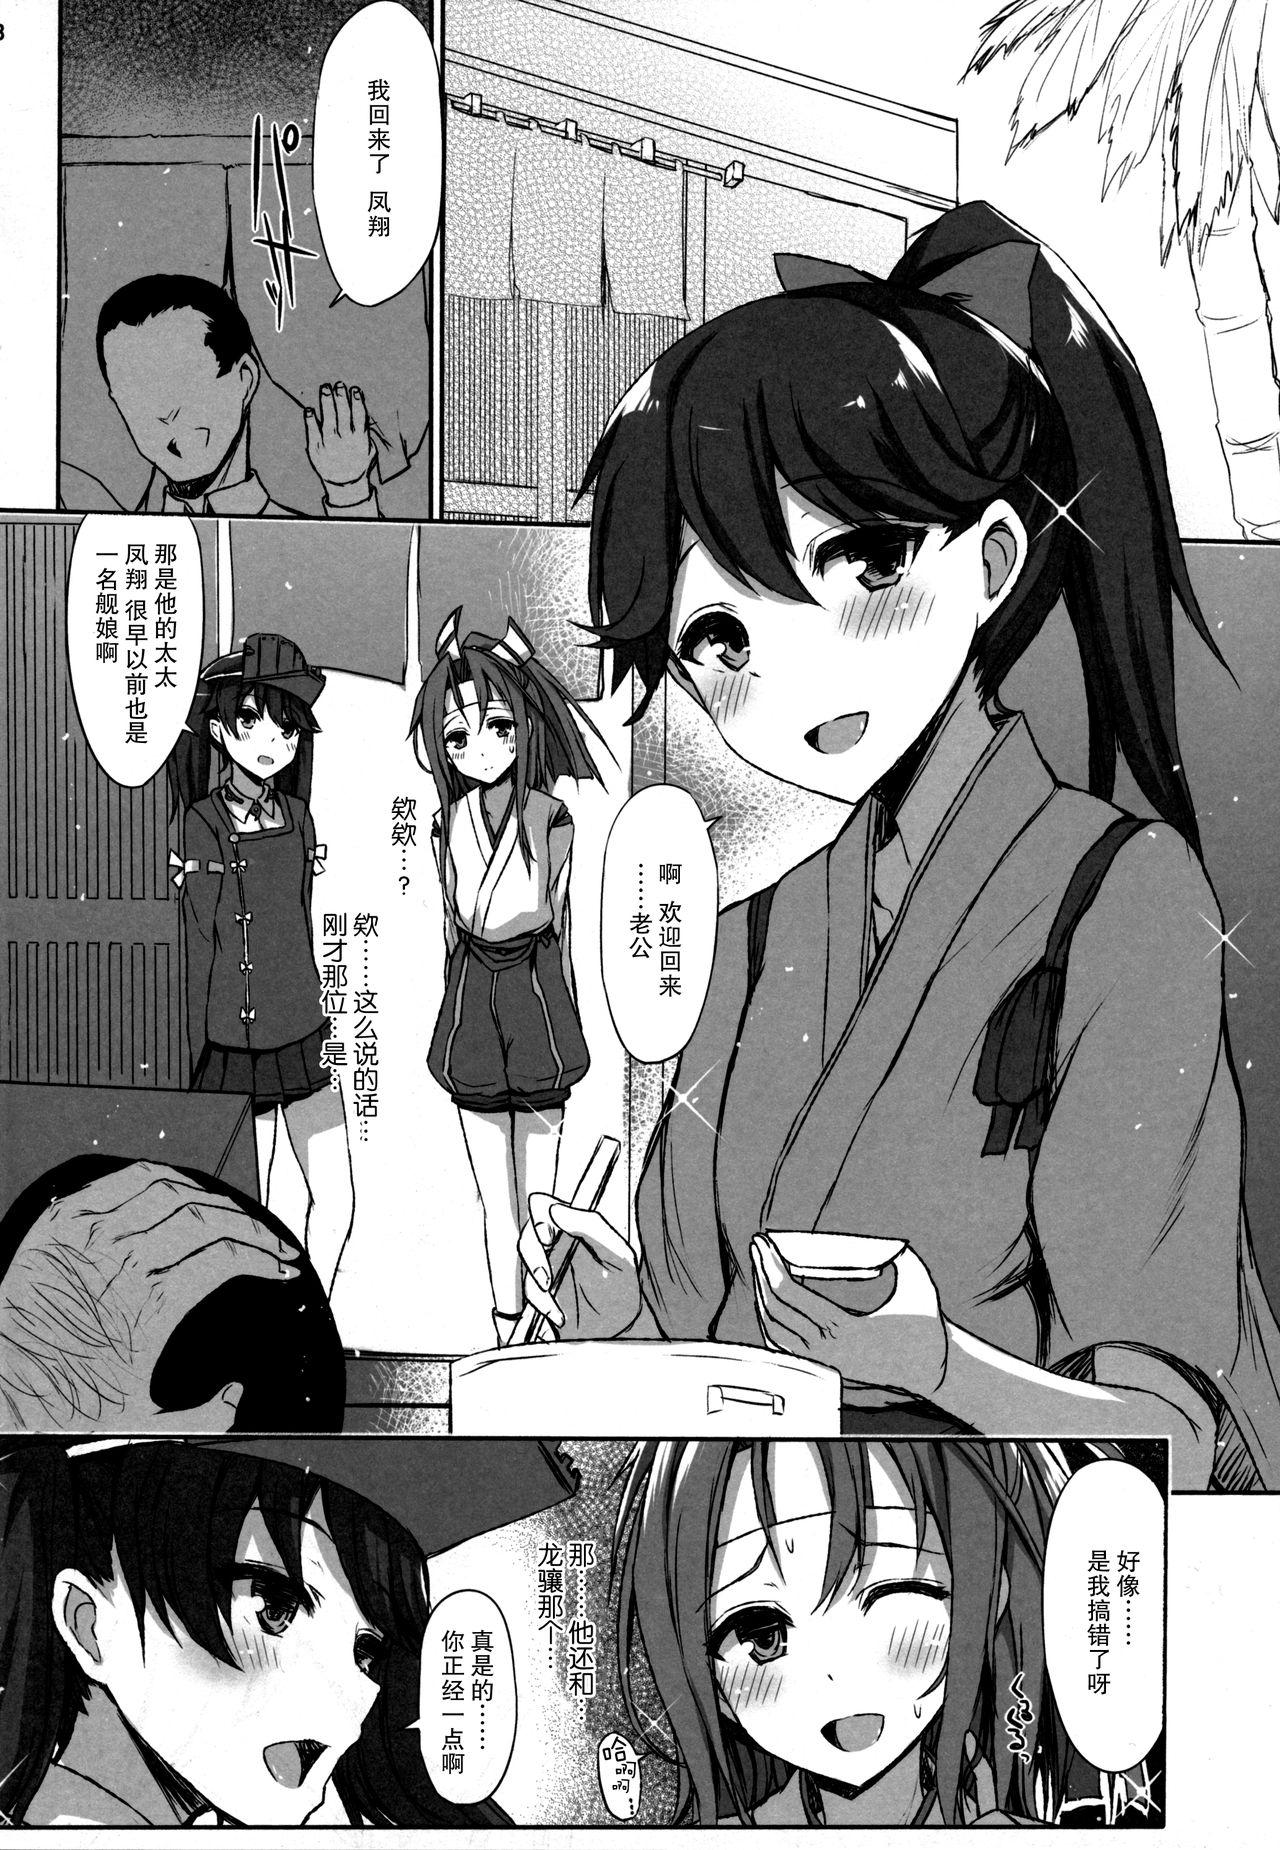  AND THEN NOTHING - Kantai collection Hot Whores - Page 8